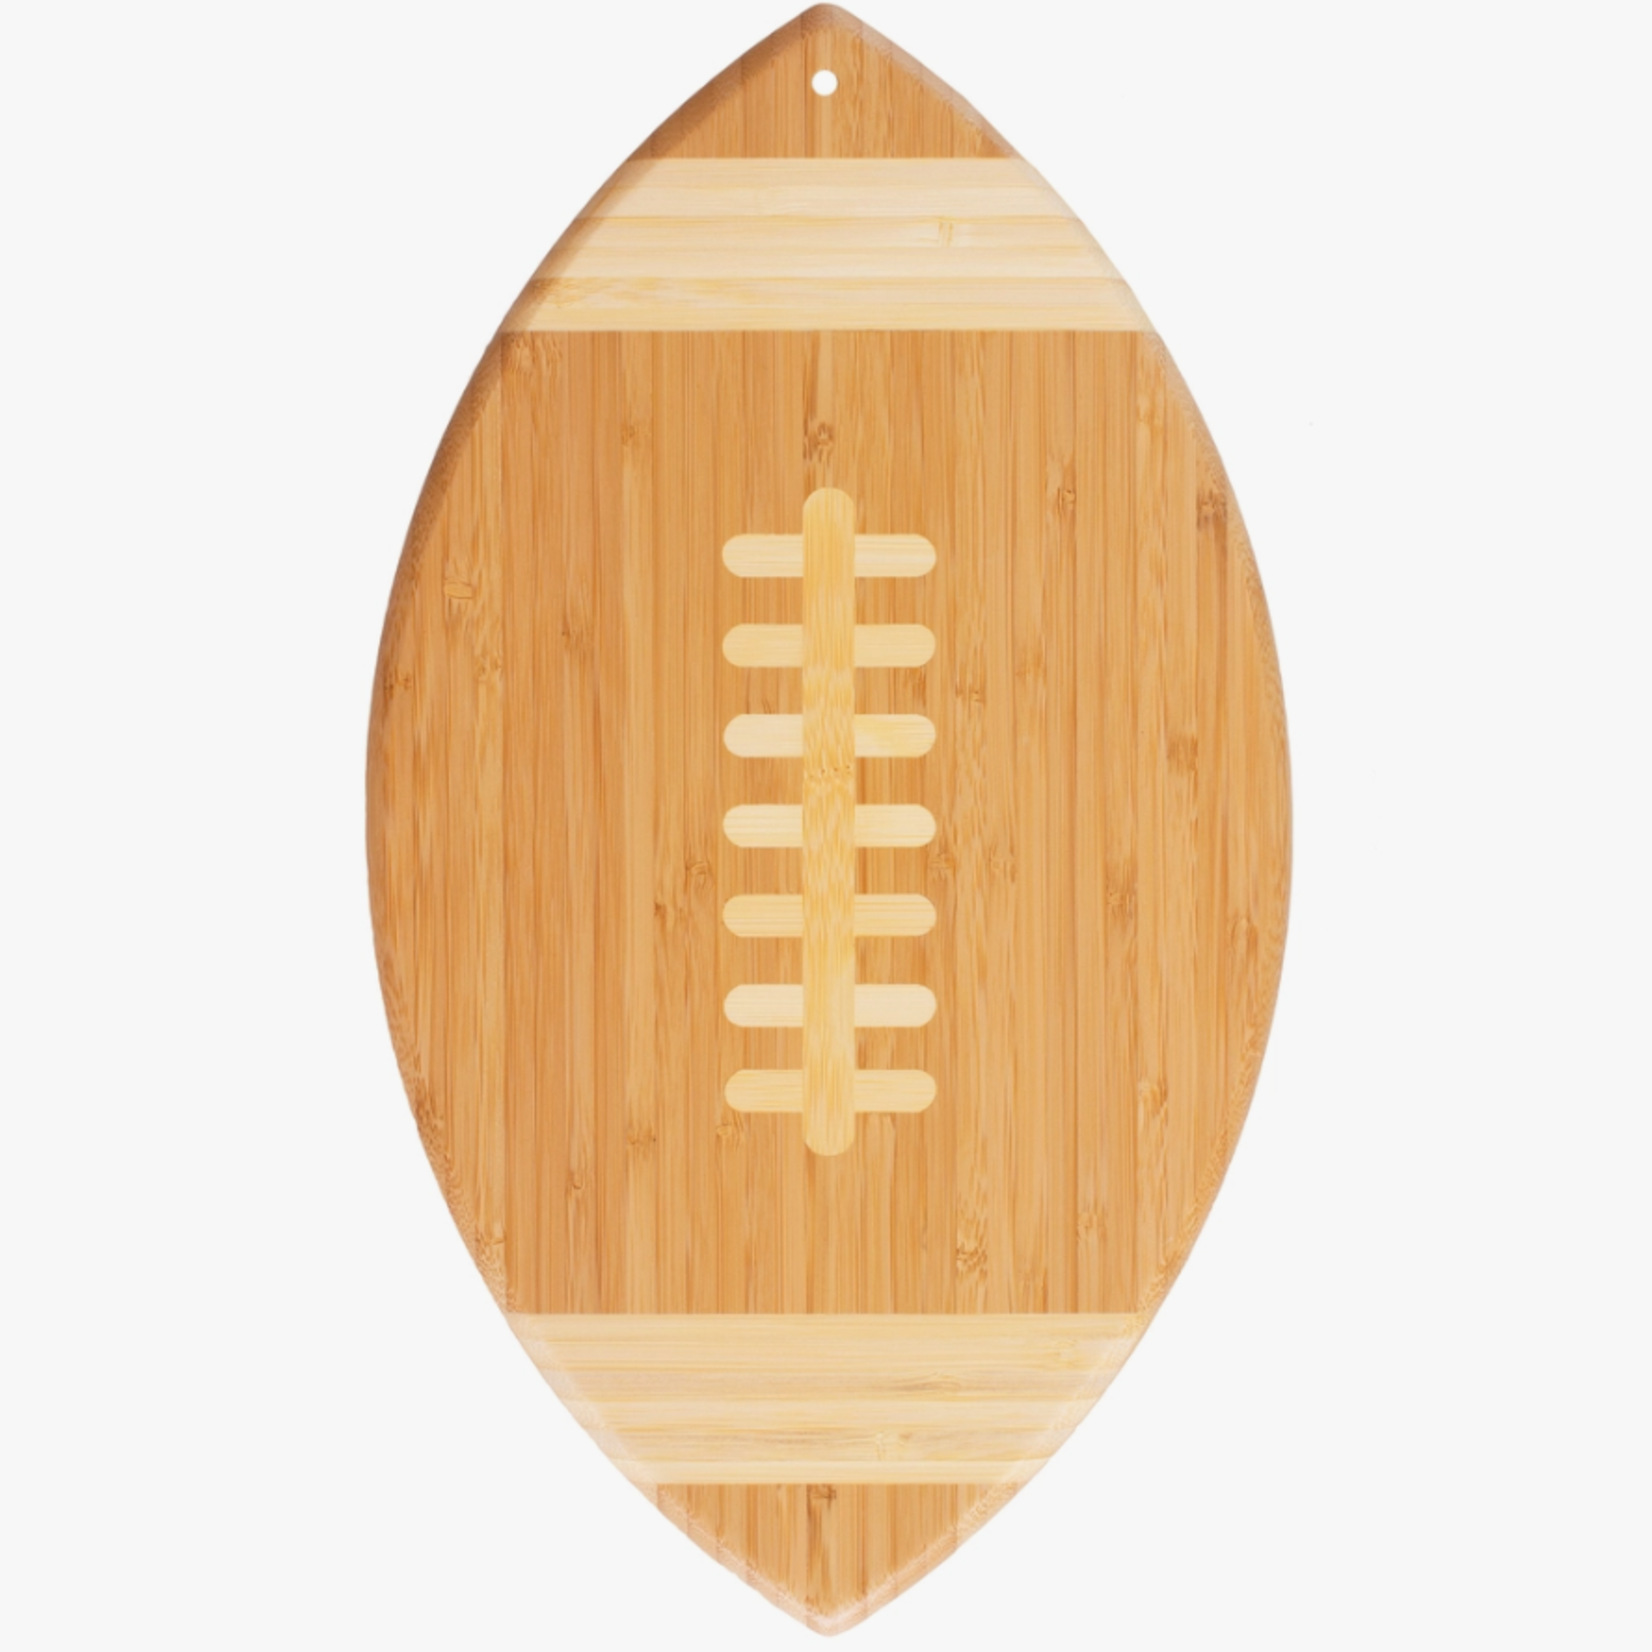 Totally Bamboo Football Shaped Serving & Cutting Board